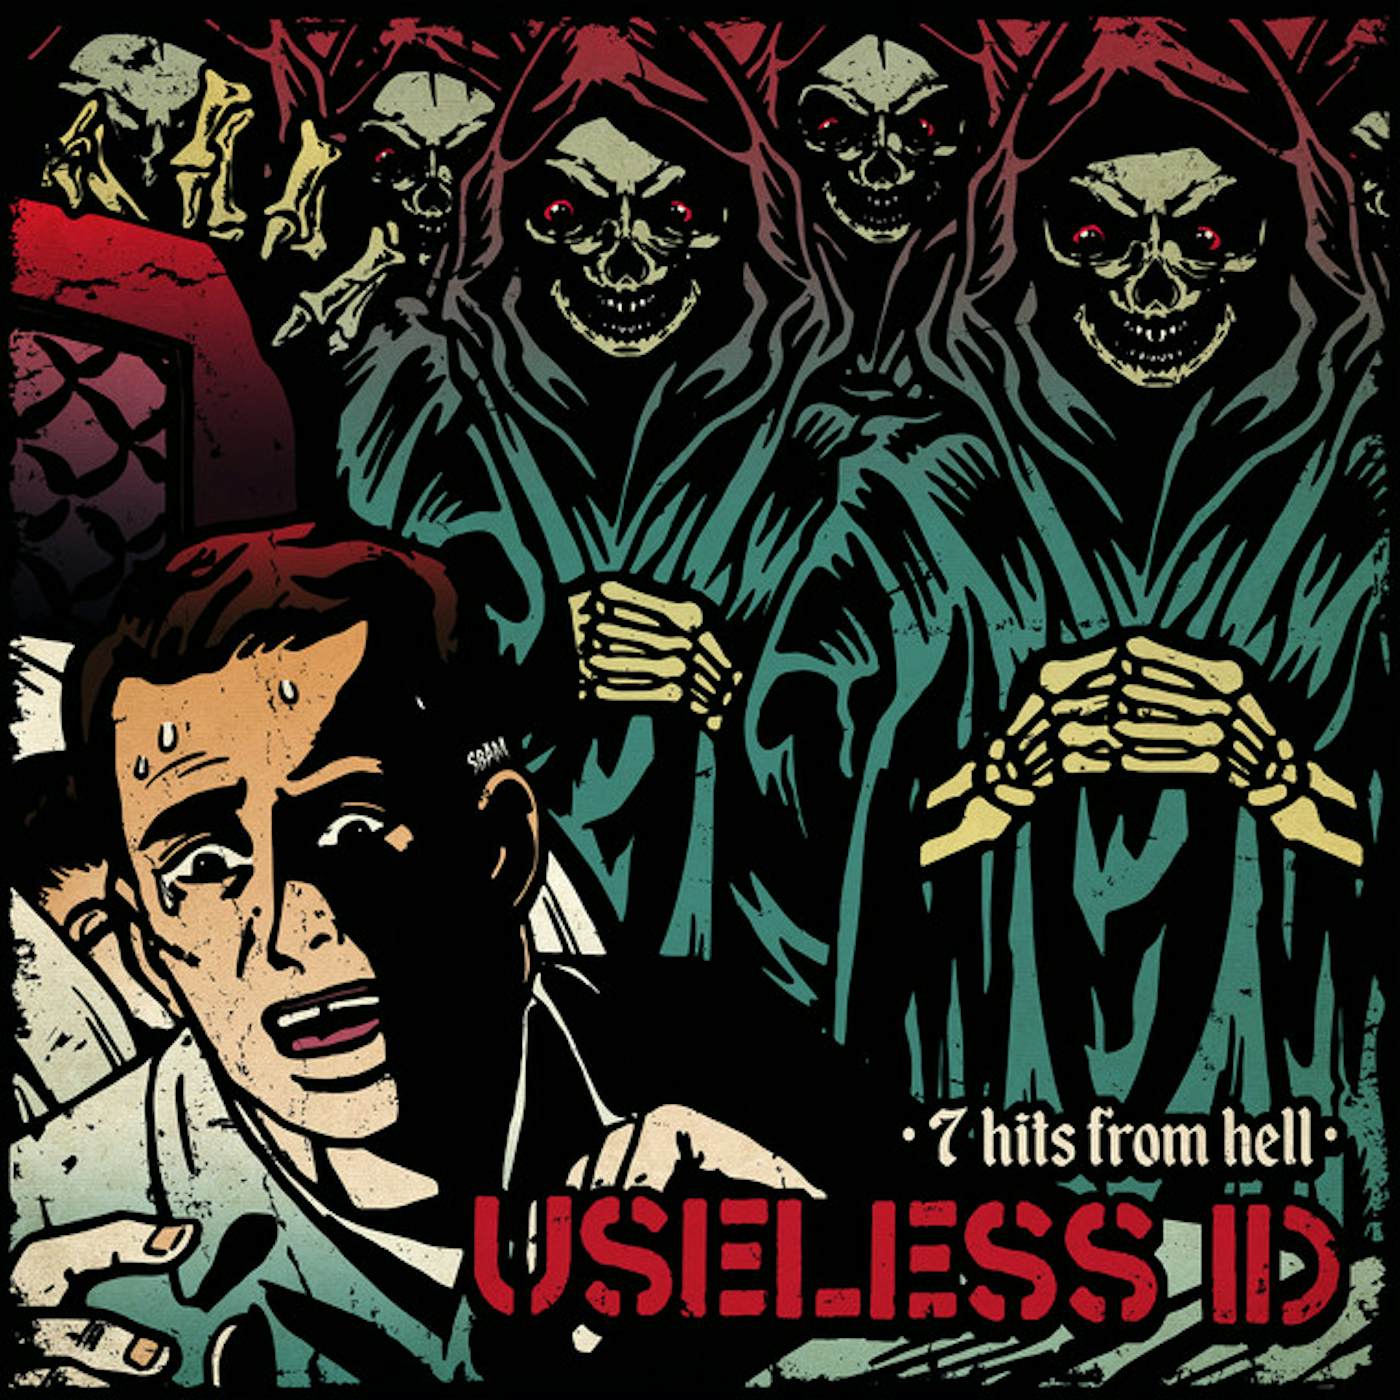 Useless Id 7 Hits from Hell Vinyl Record